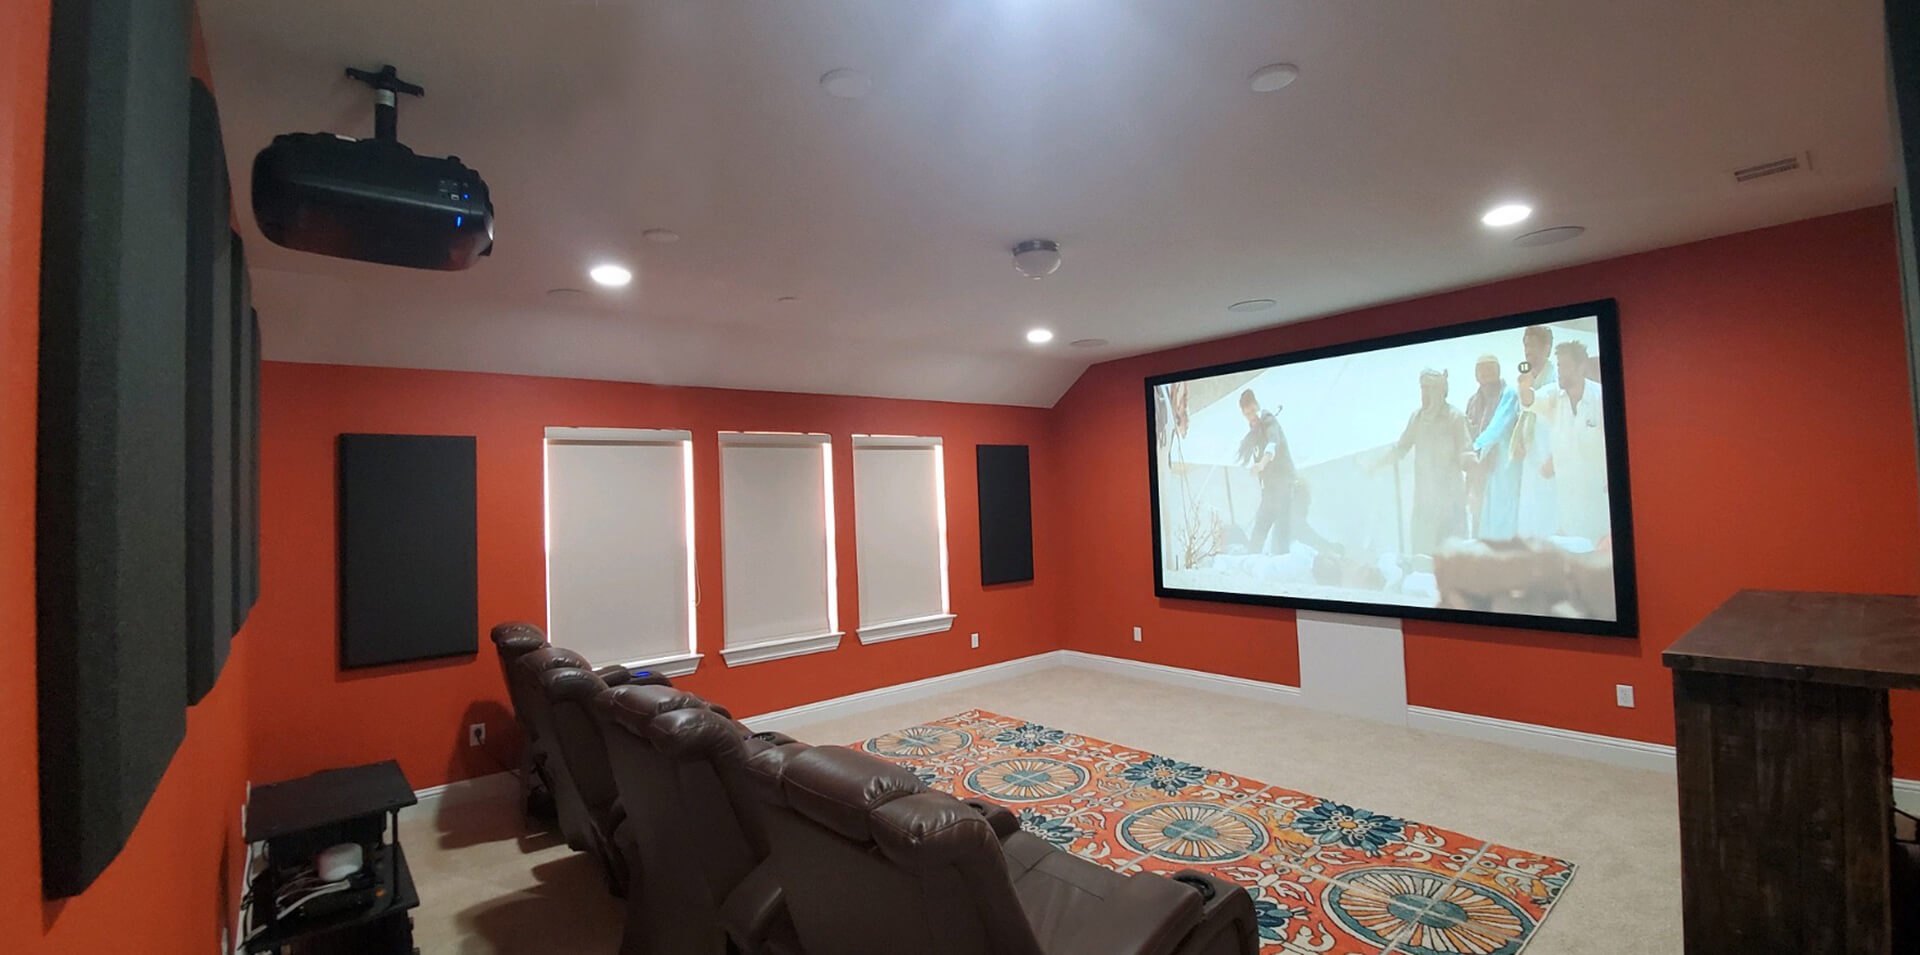 Home Theater Installation Services Austin - AV Connect